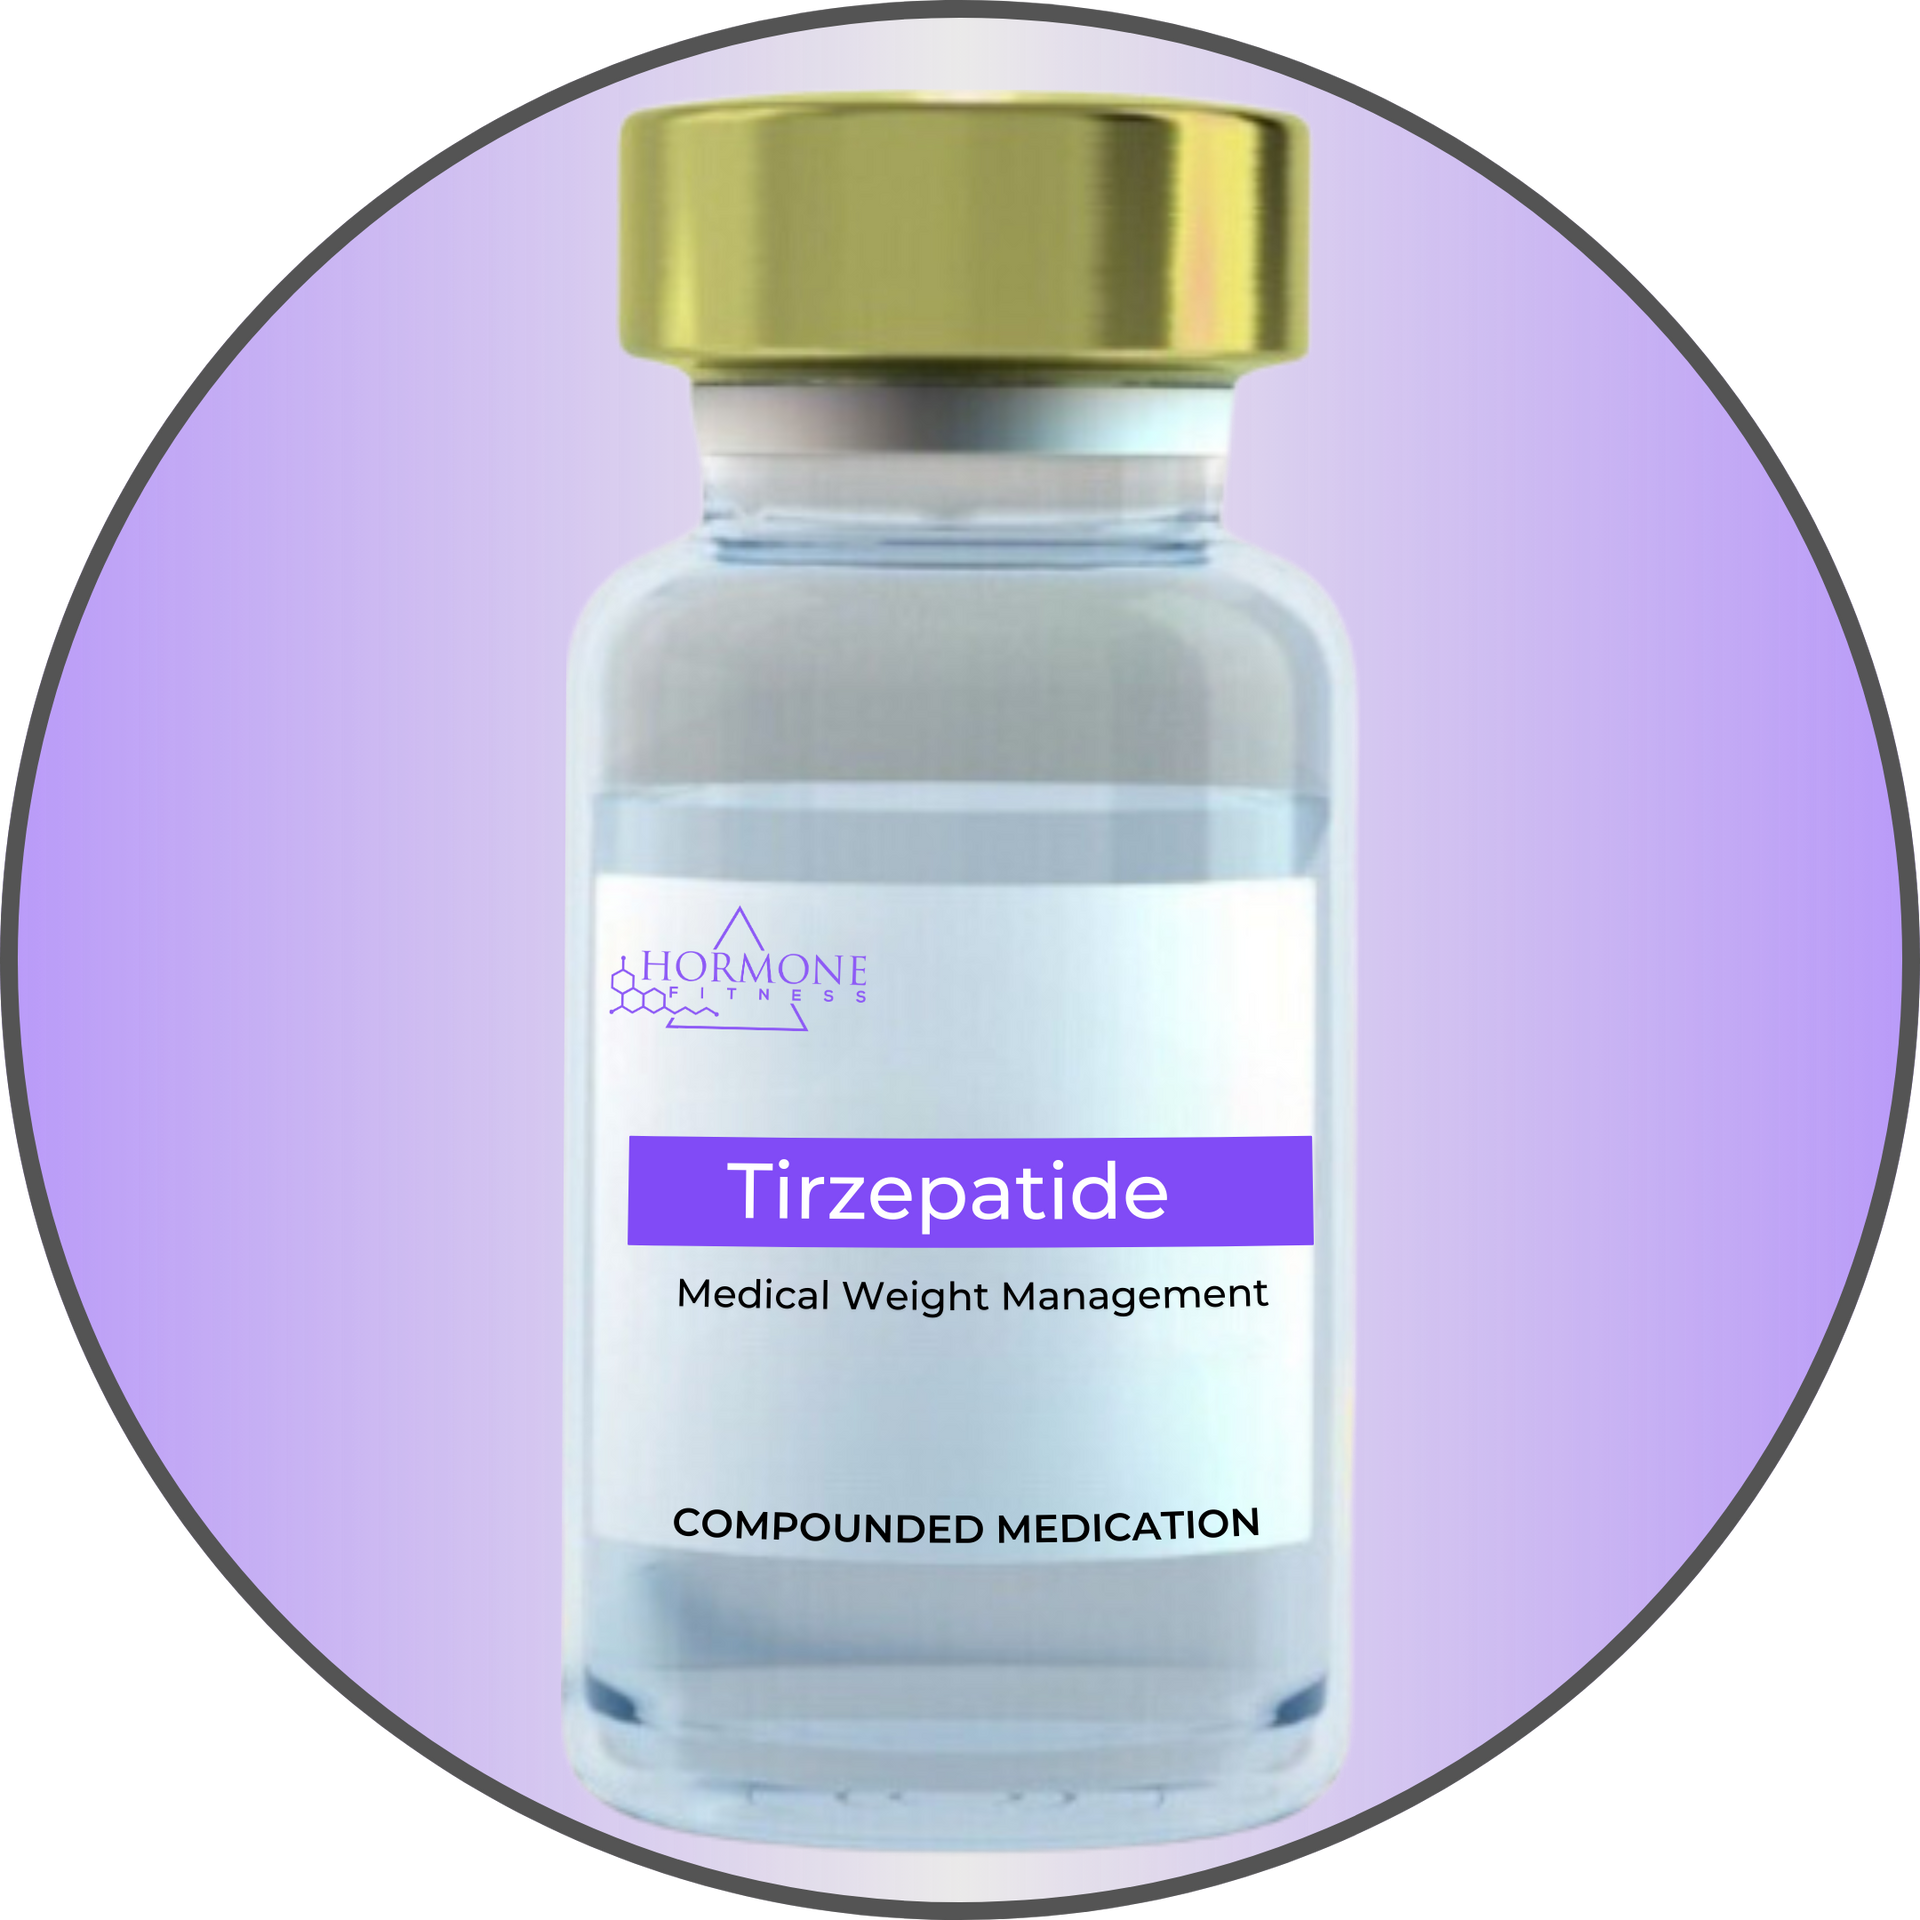 A vial of tirzepatide compounded weight loss medication on a purple background